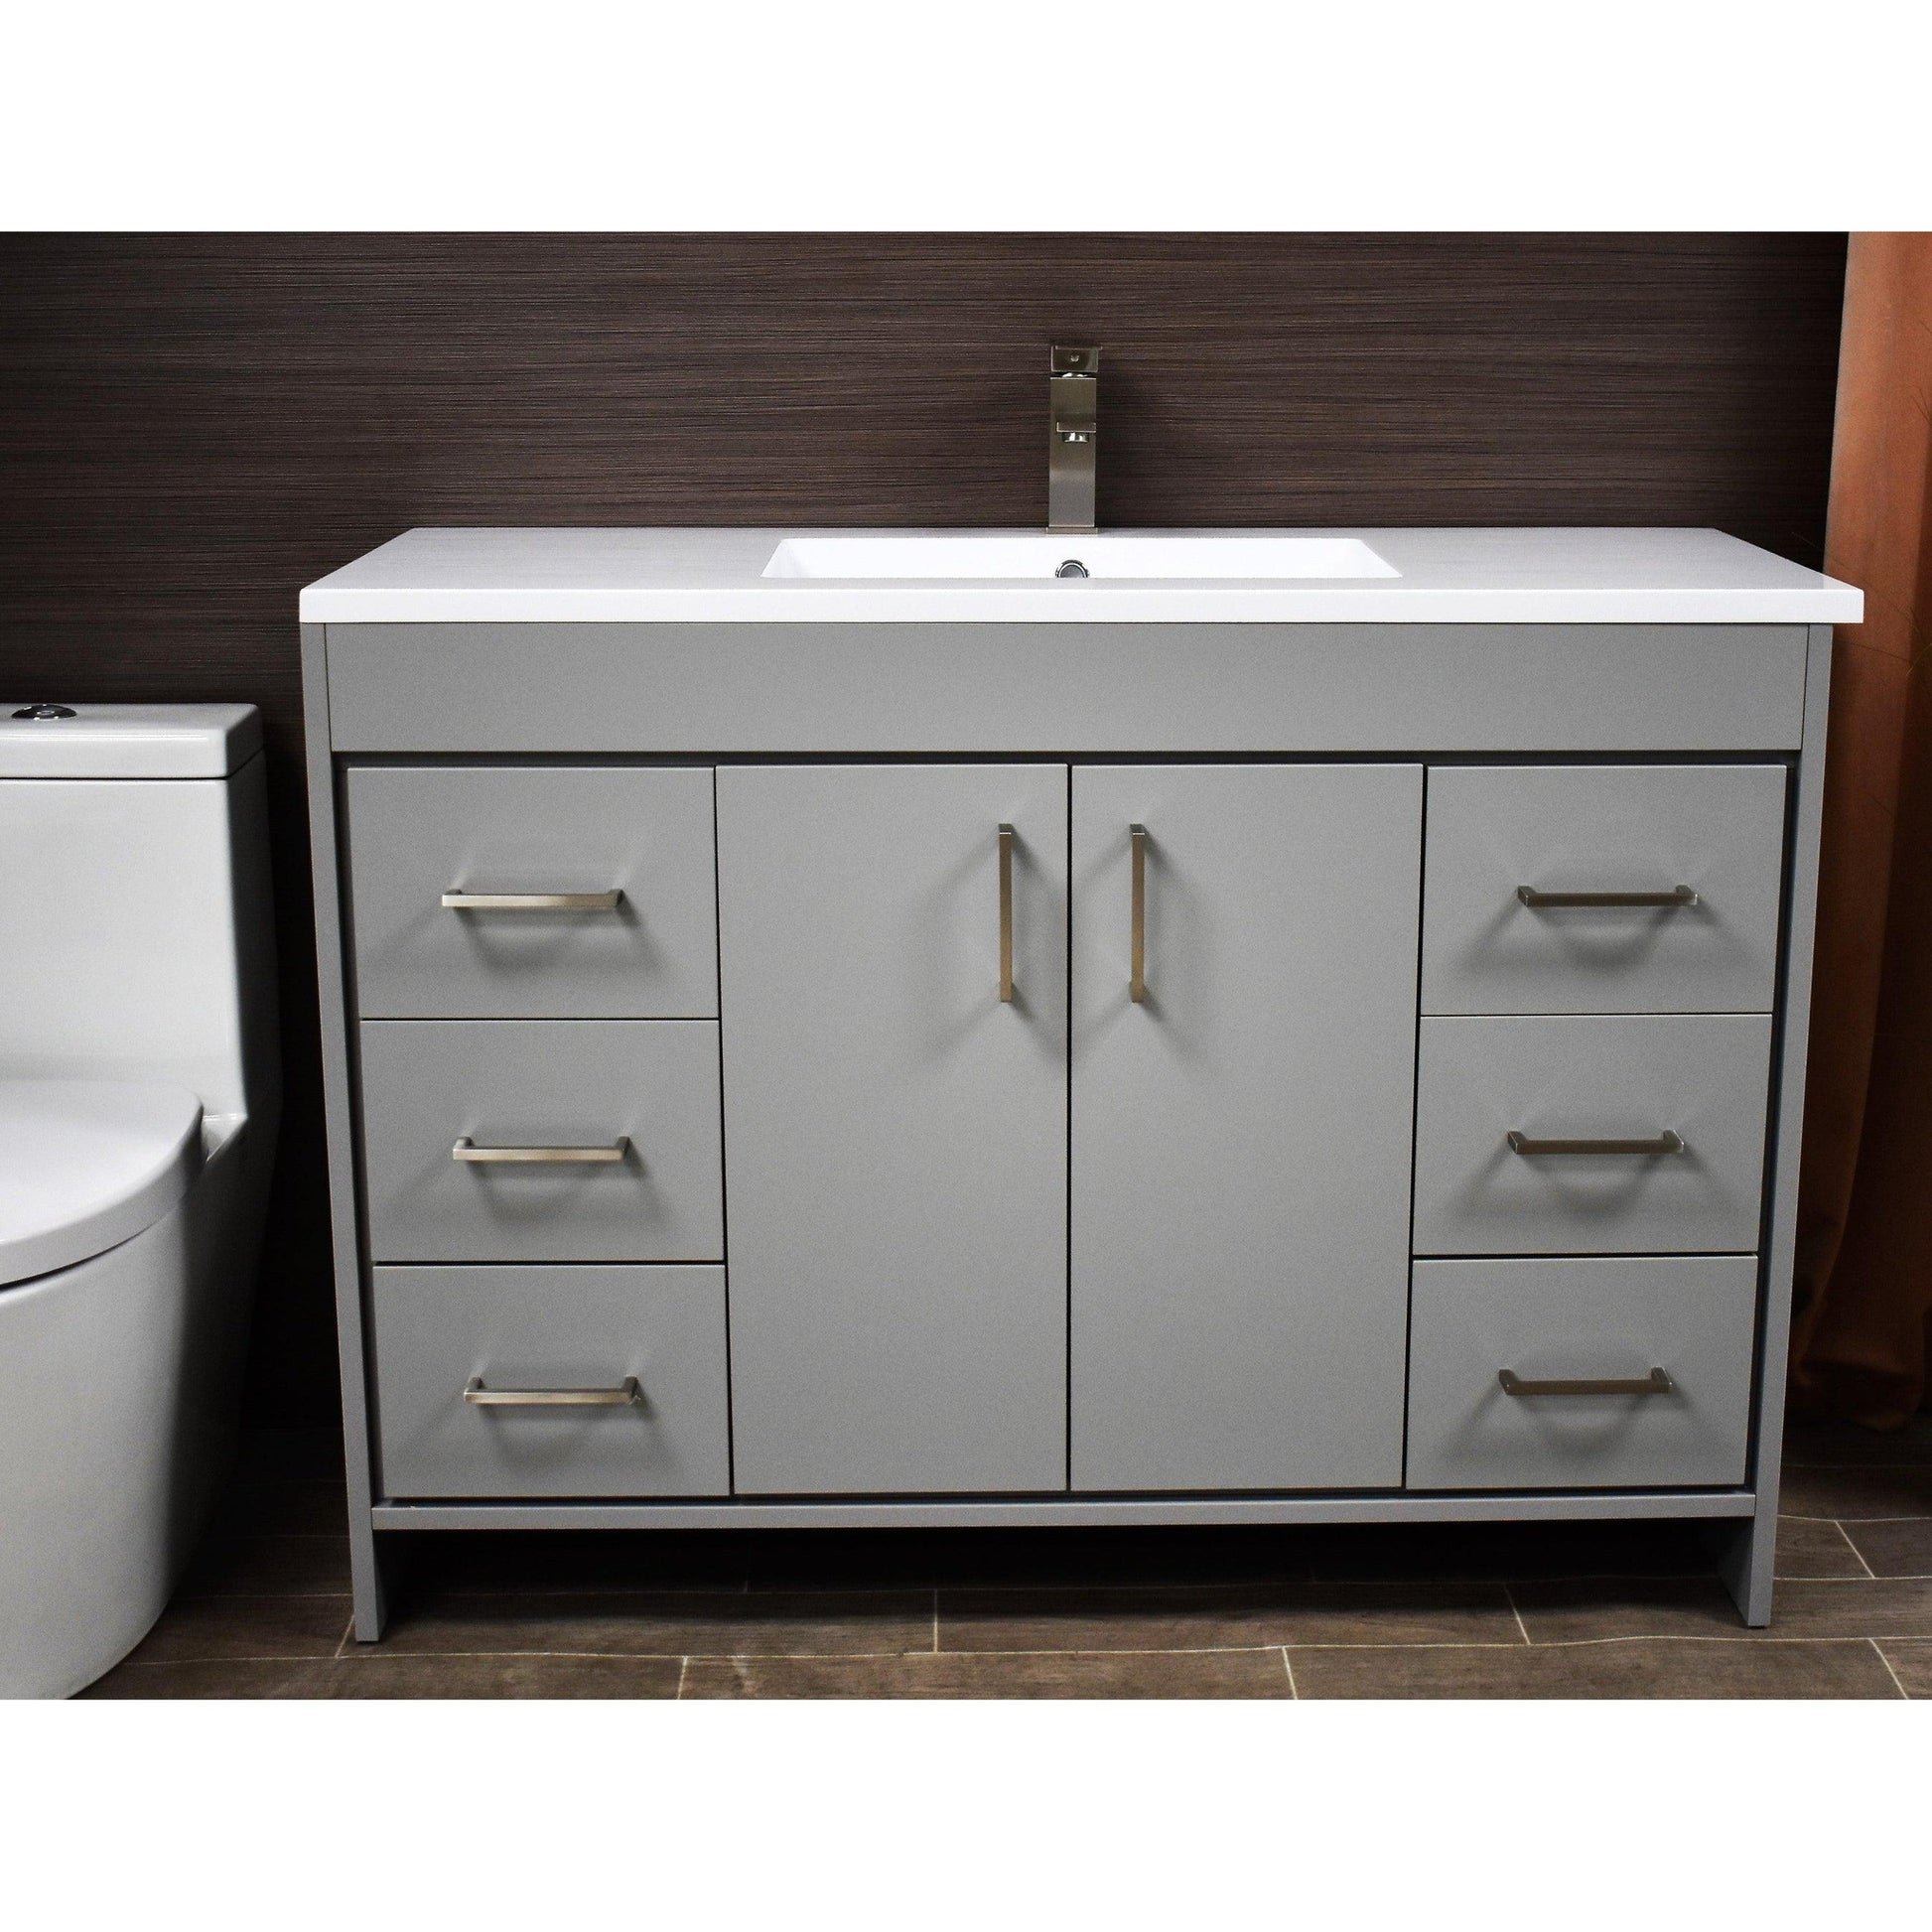 Volpa USA Rio 60" Gray Freestanding Modern Bathroom Vanity With Integrated Acrylic Single Sink Top and Brushed Nickel Handles